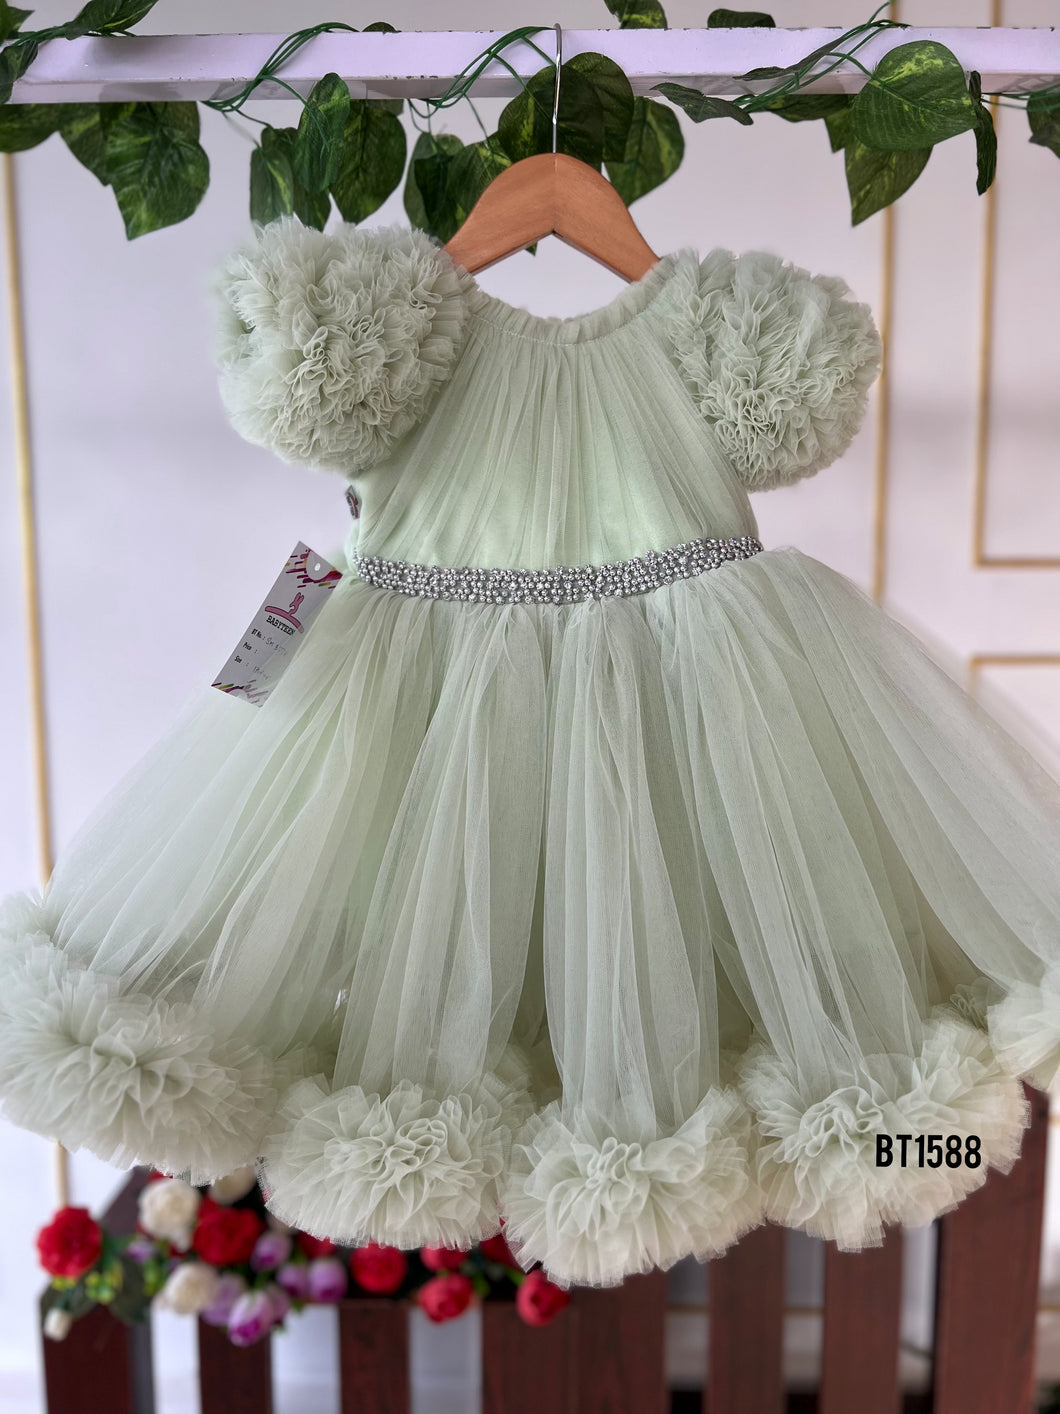 BT1588 Mint Whisper Tulle Baby Party Dress